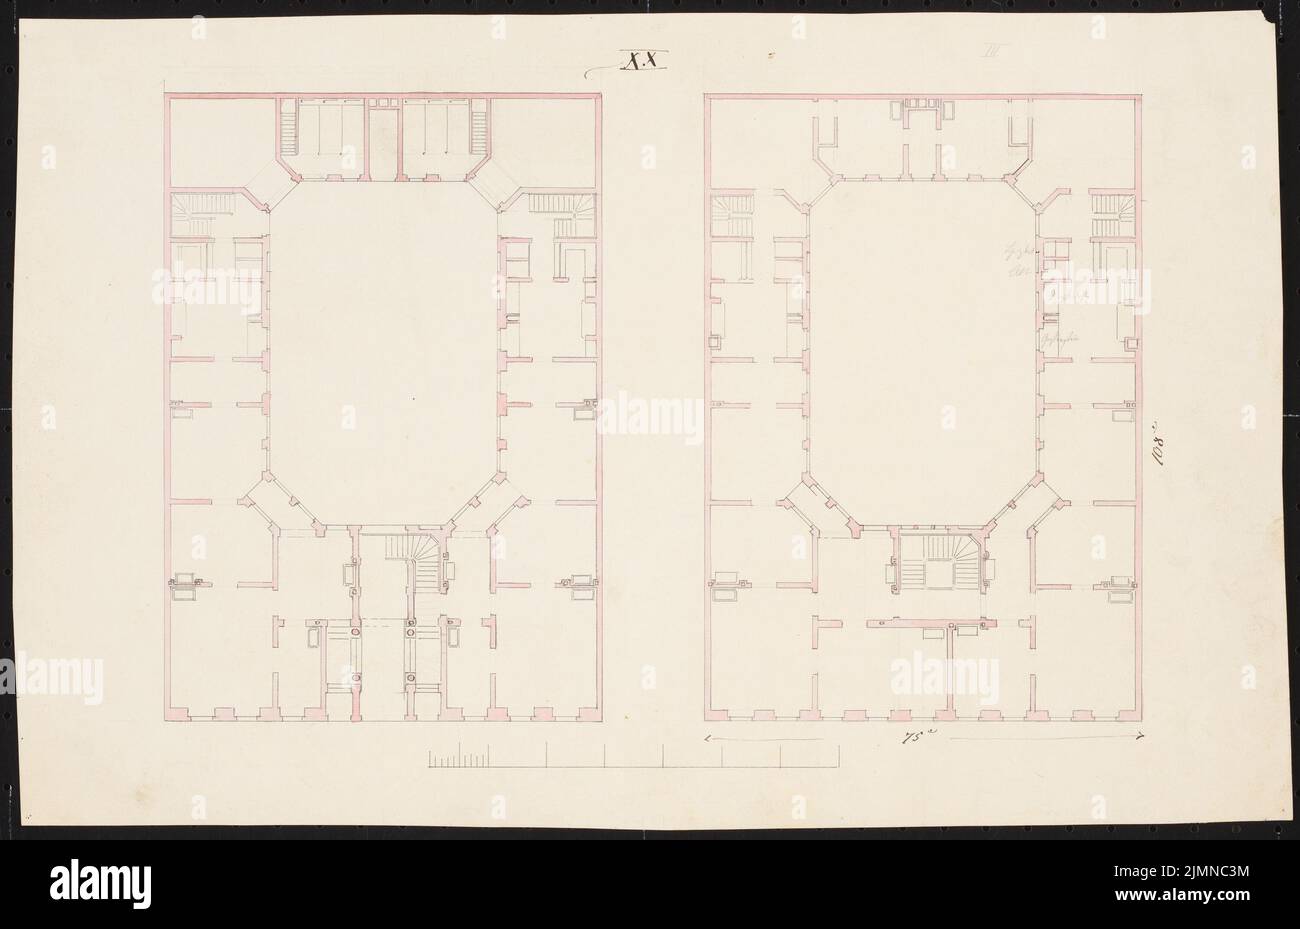 Knoblauch Eduard (1801-1865), floor plan (without date): floor plans with side wings and cross buildings around the octagonal courtyard. Tusche watercolor, 28.2 x 43.6 cm (including scan edges) Stock Photo